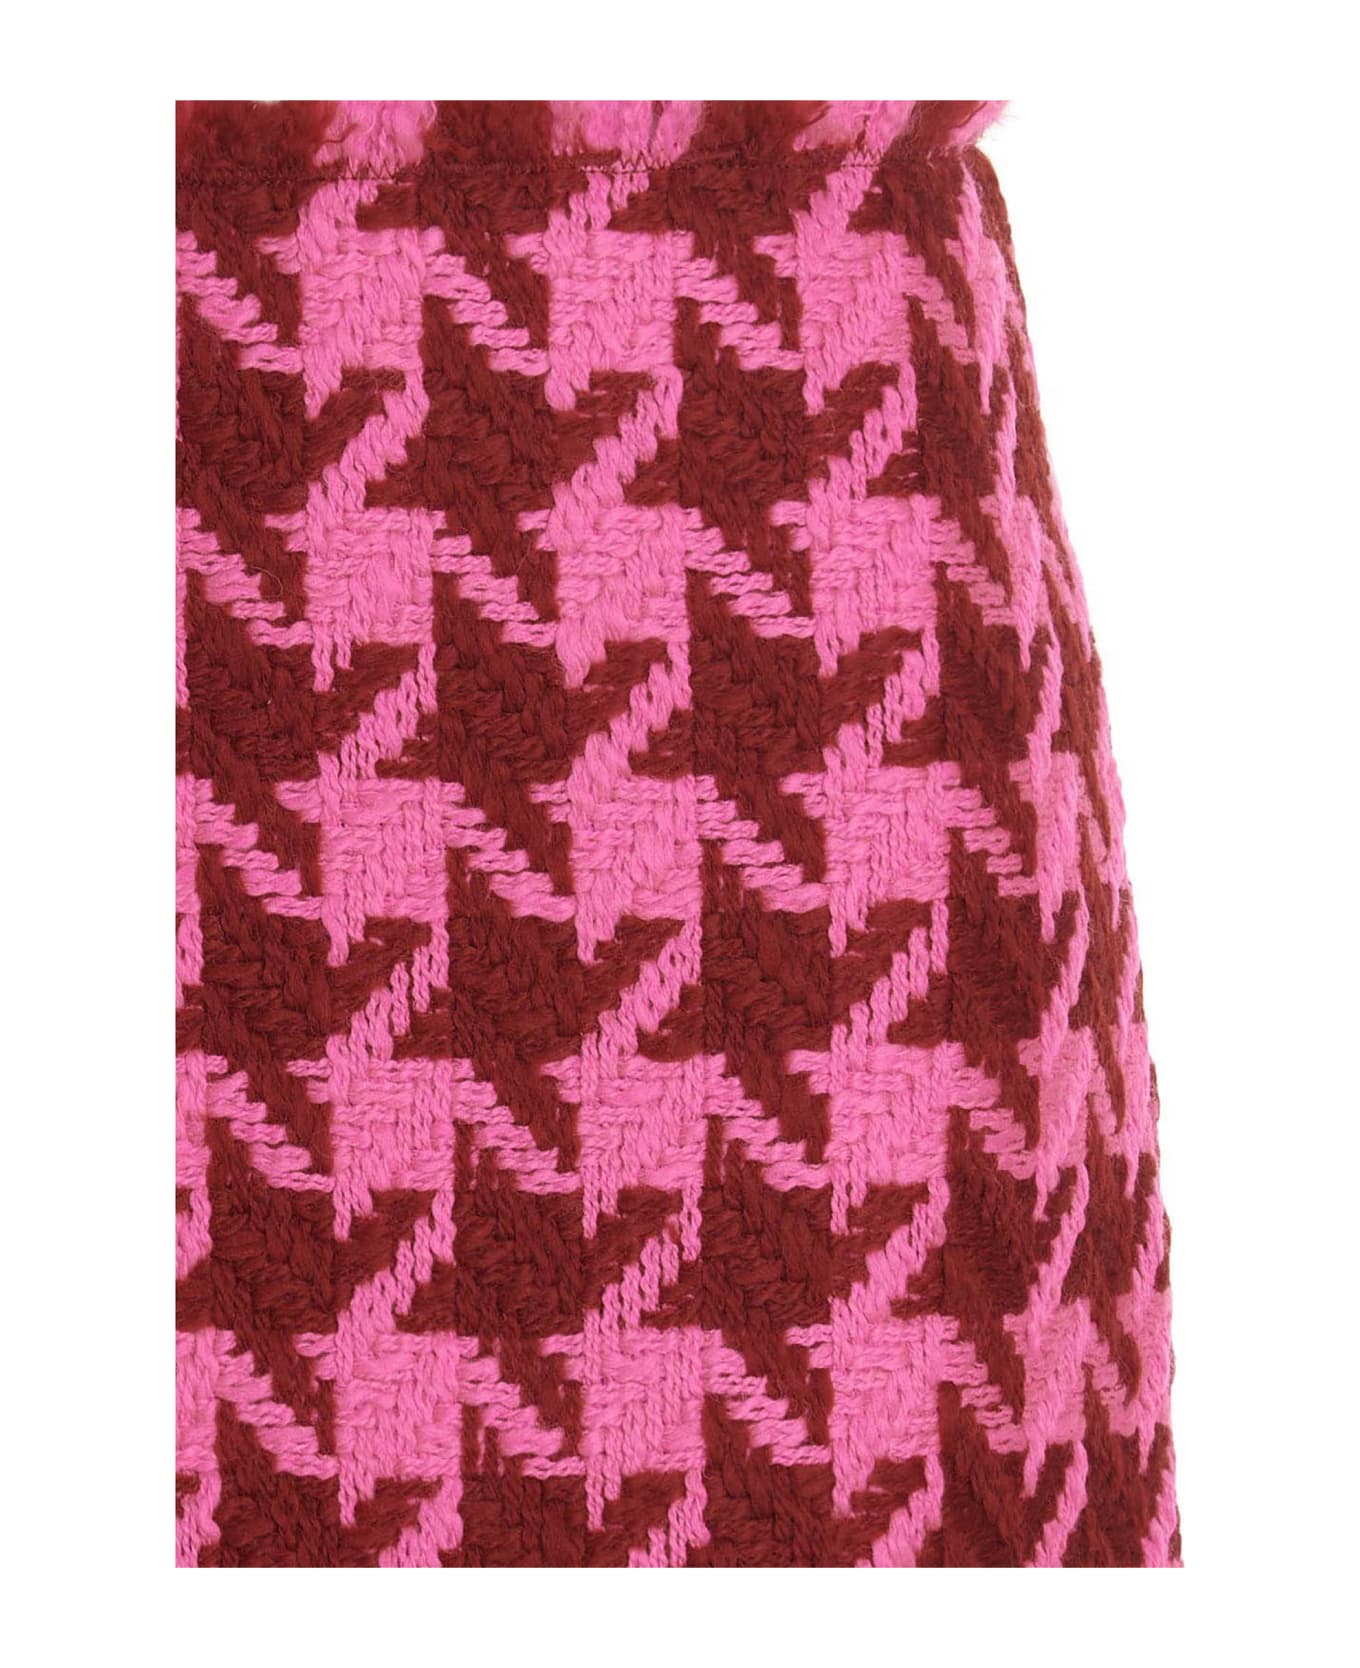 Versace Houndstooth Skirt - Multicolor